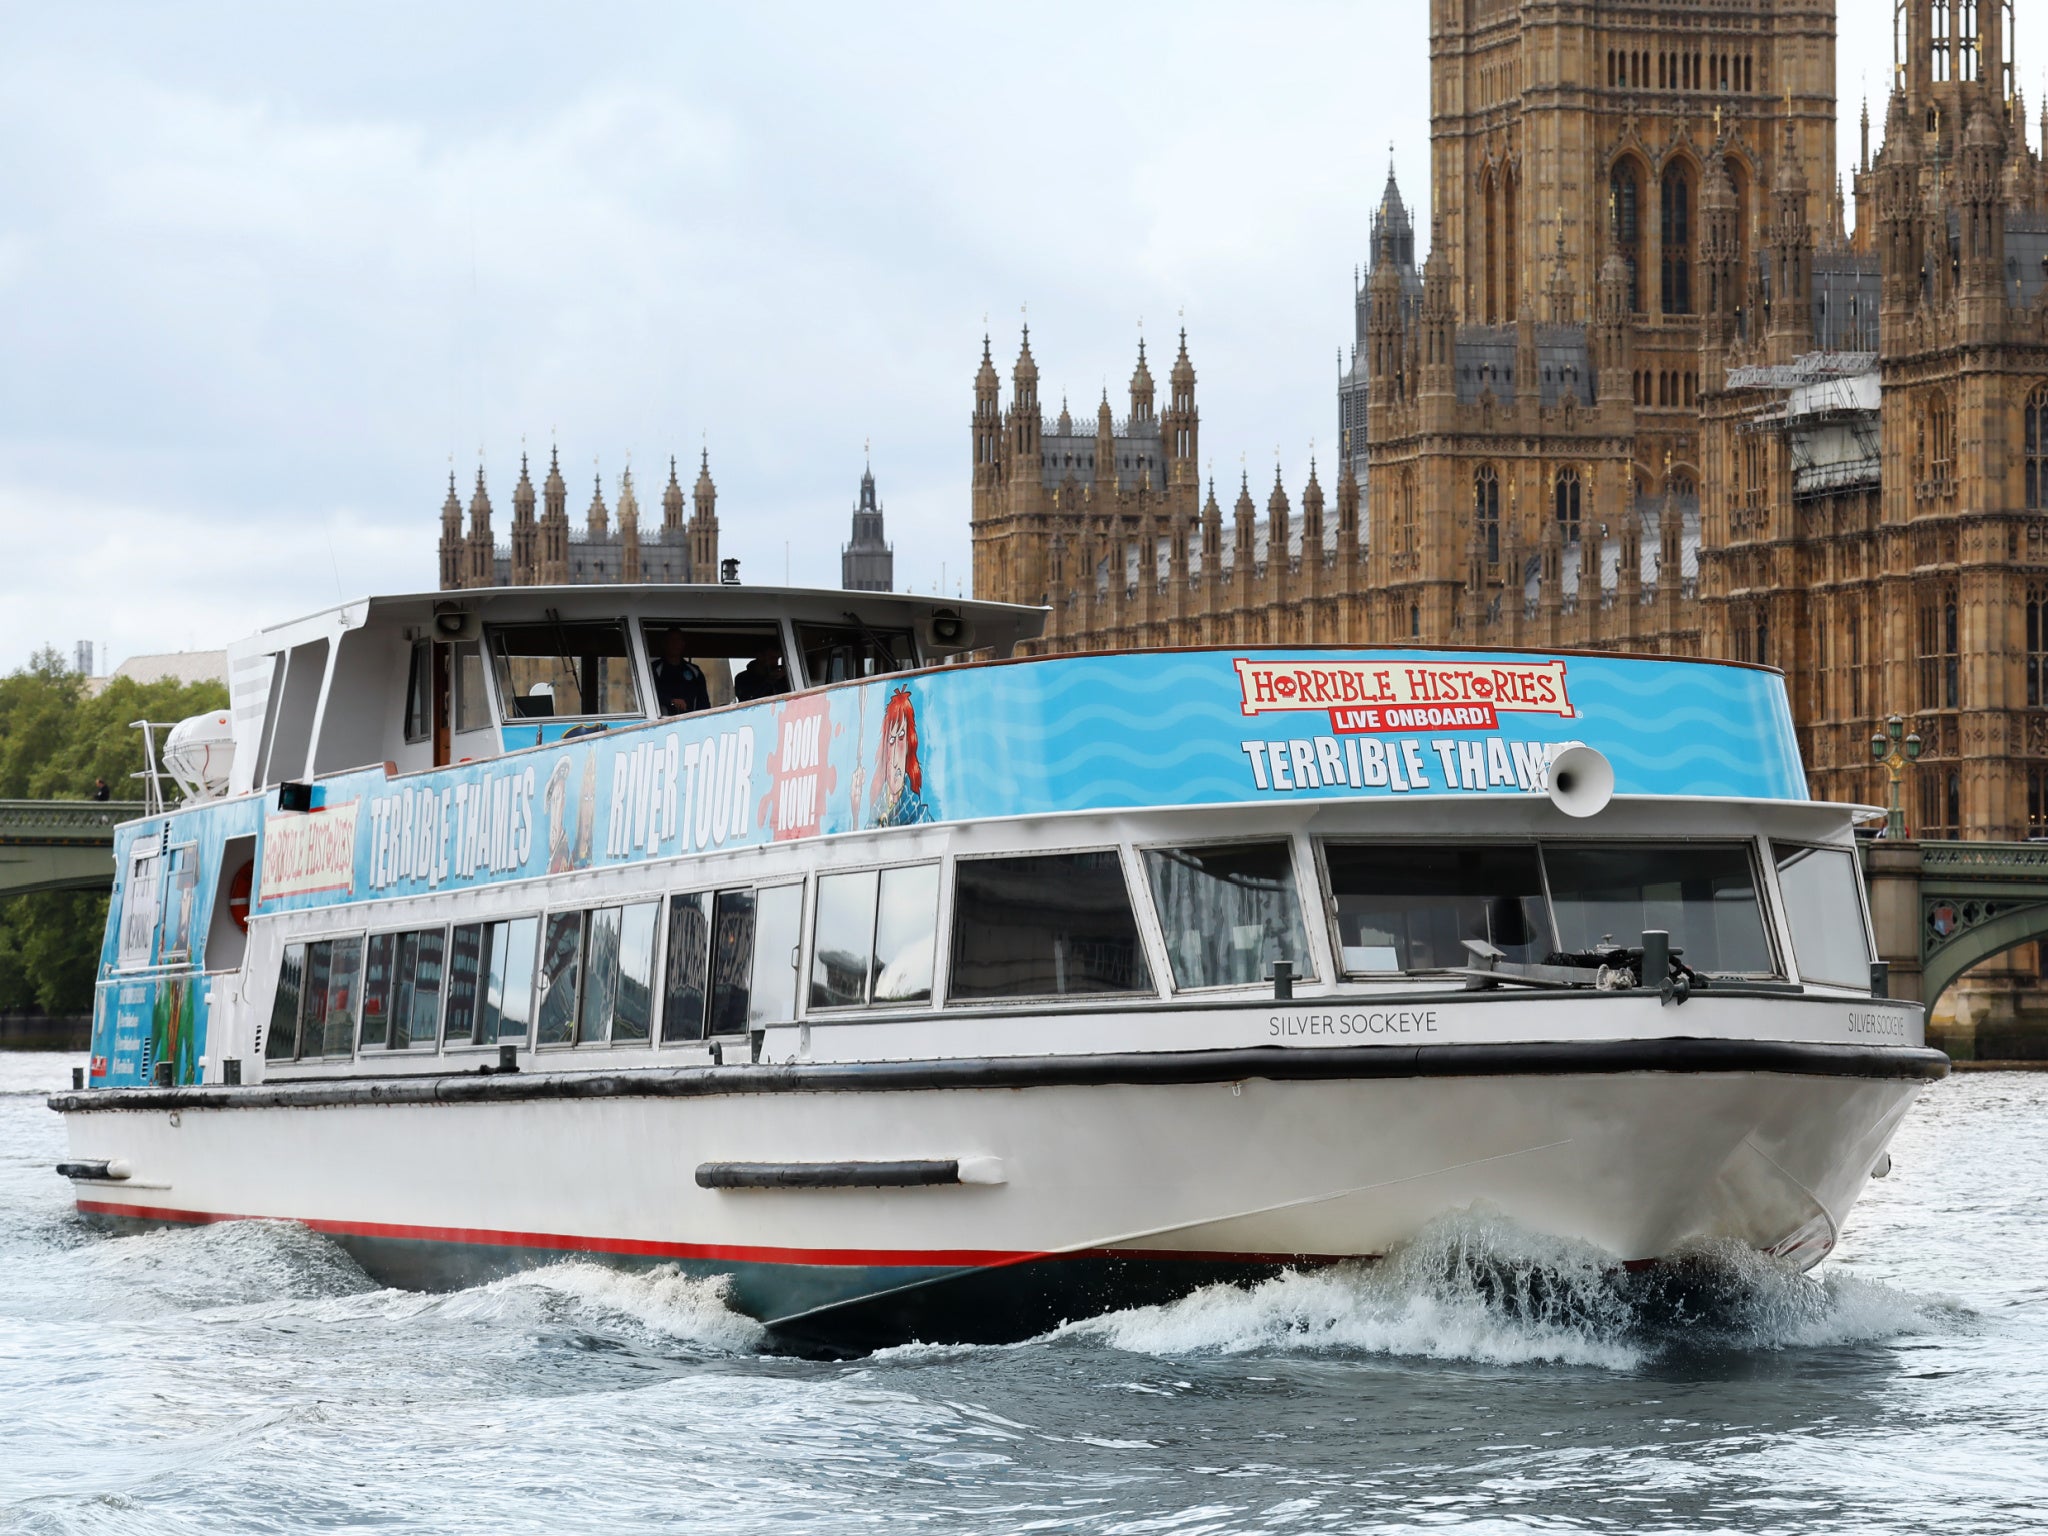 A Terrible Thames boat trip will teach kids gruesome facts